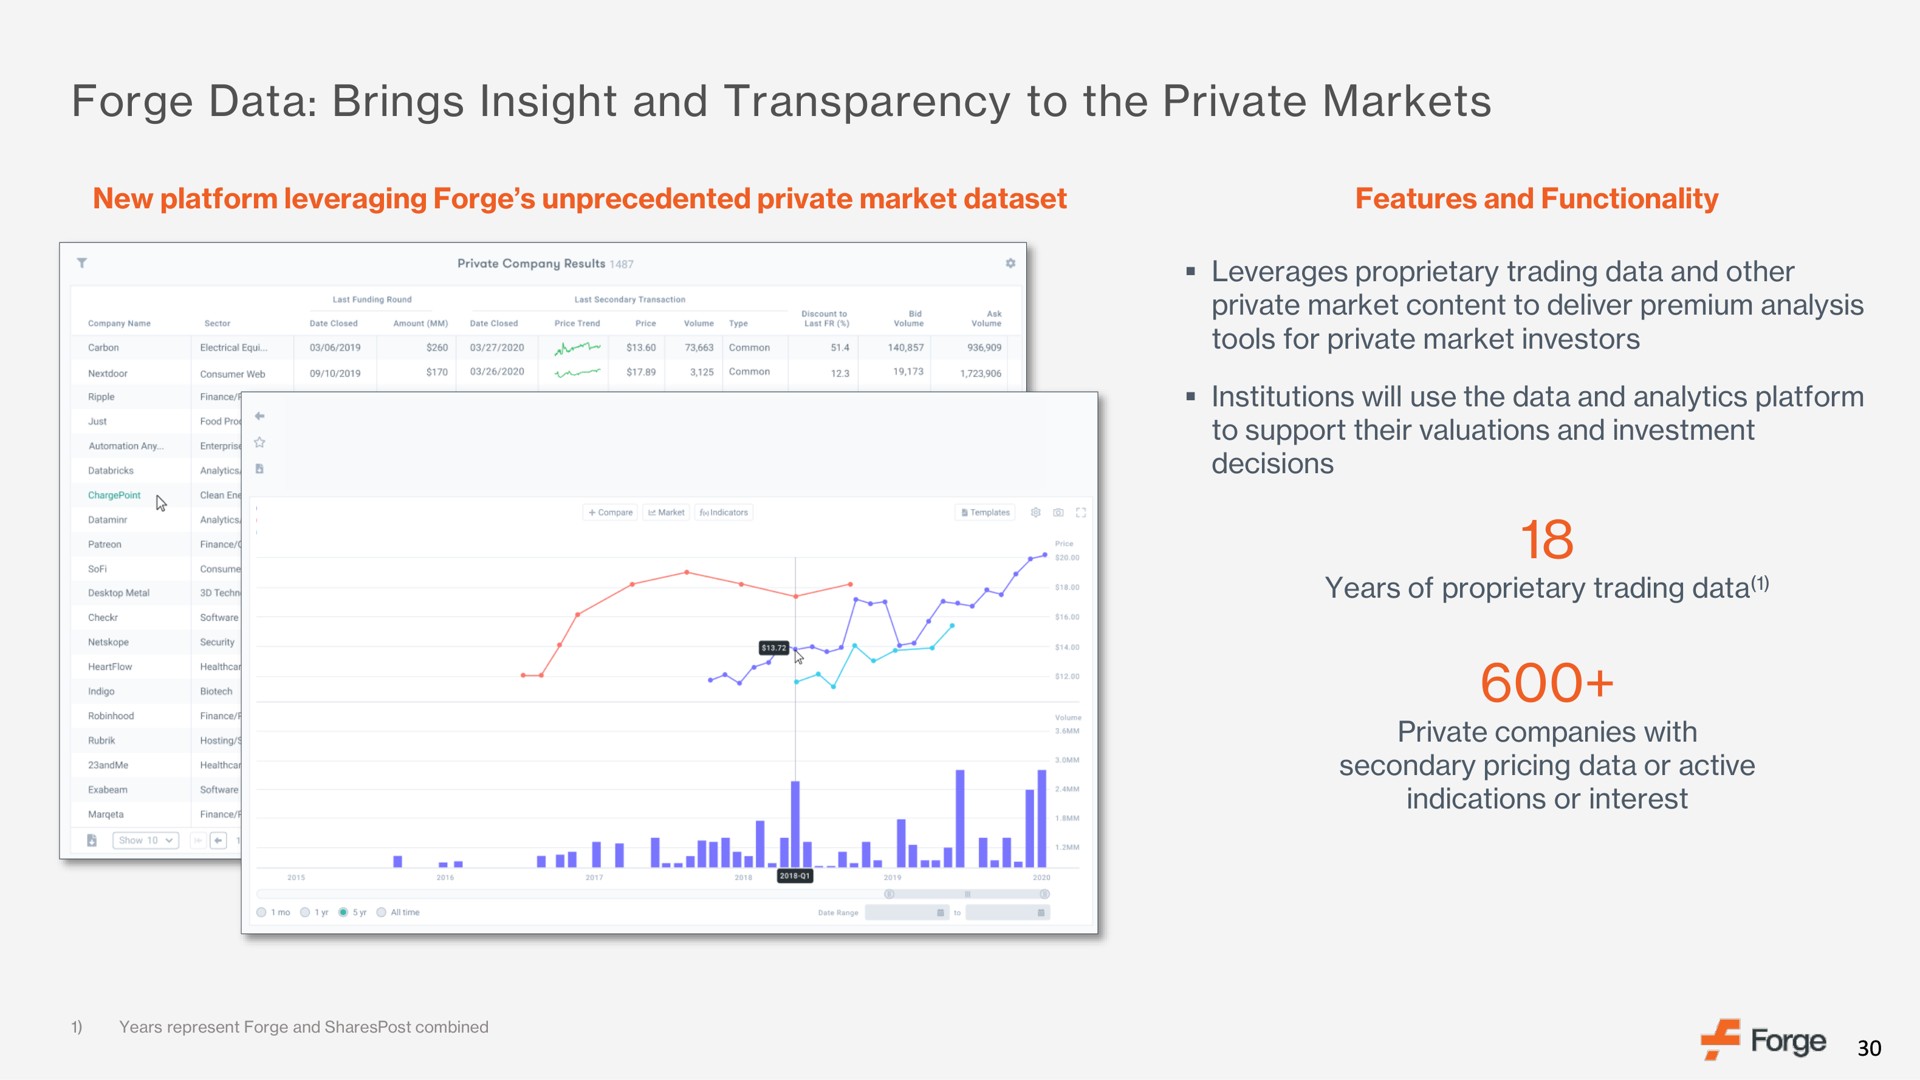 forge data brings insight and transparency to the private markets | Forge